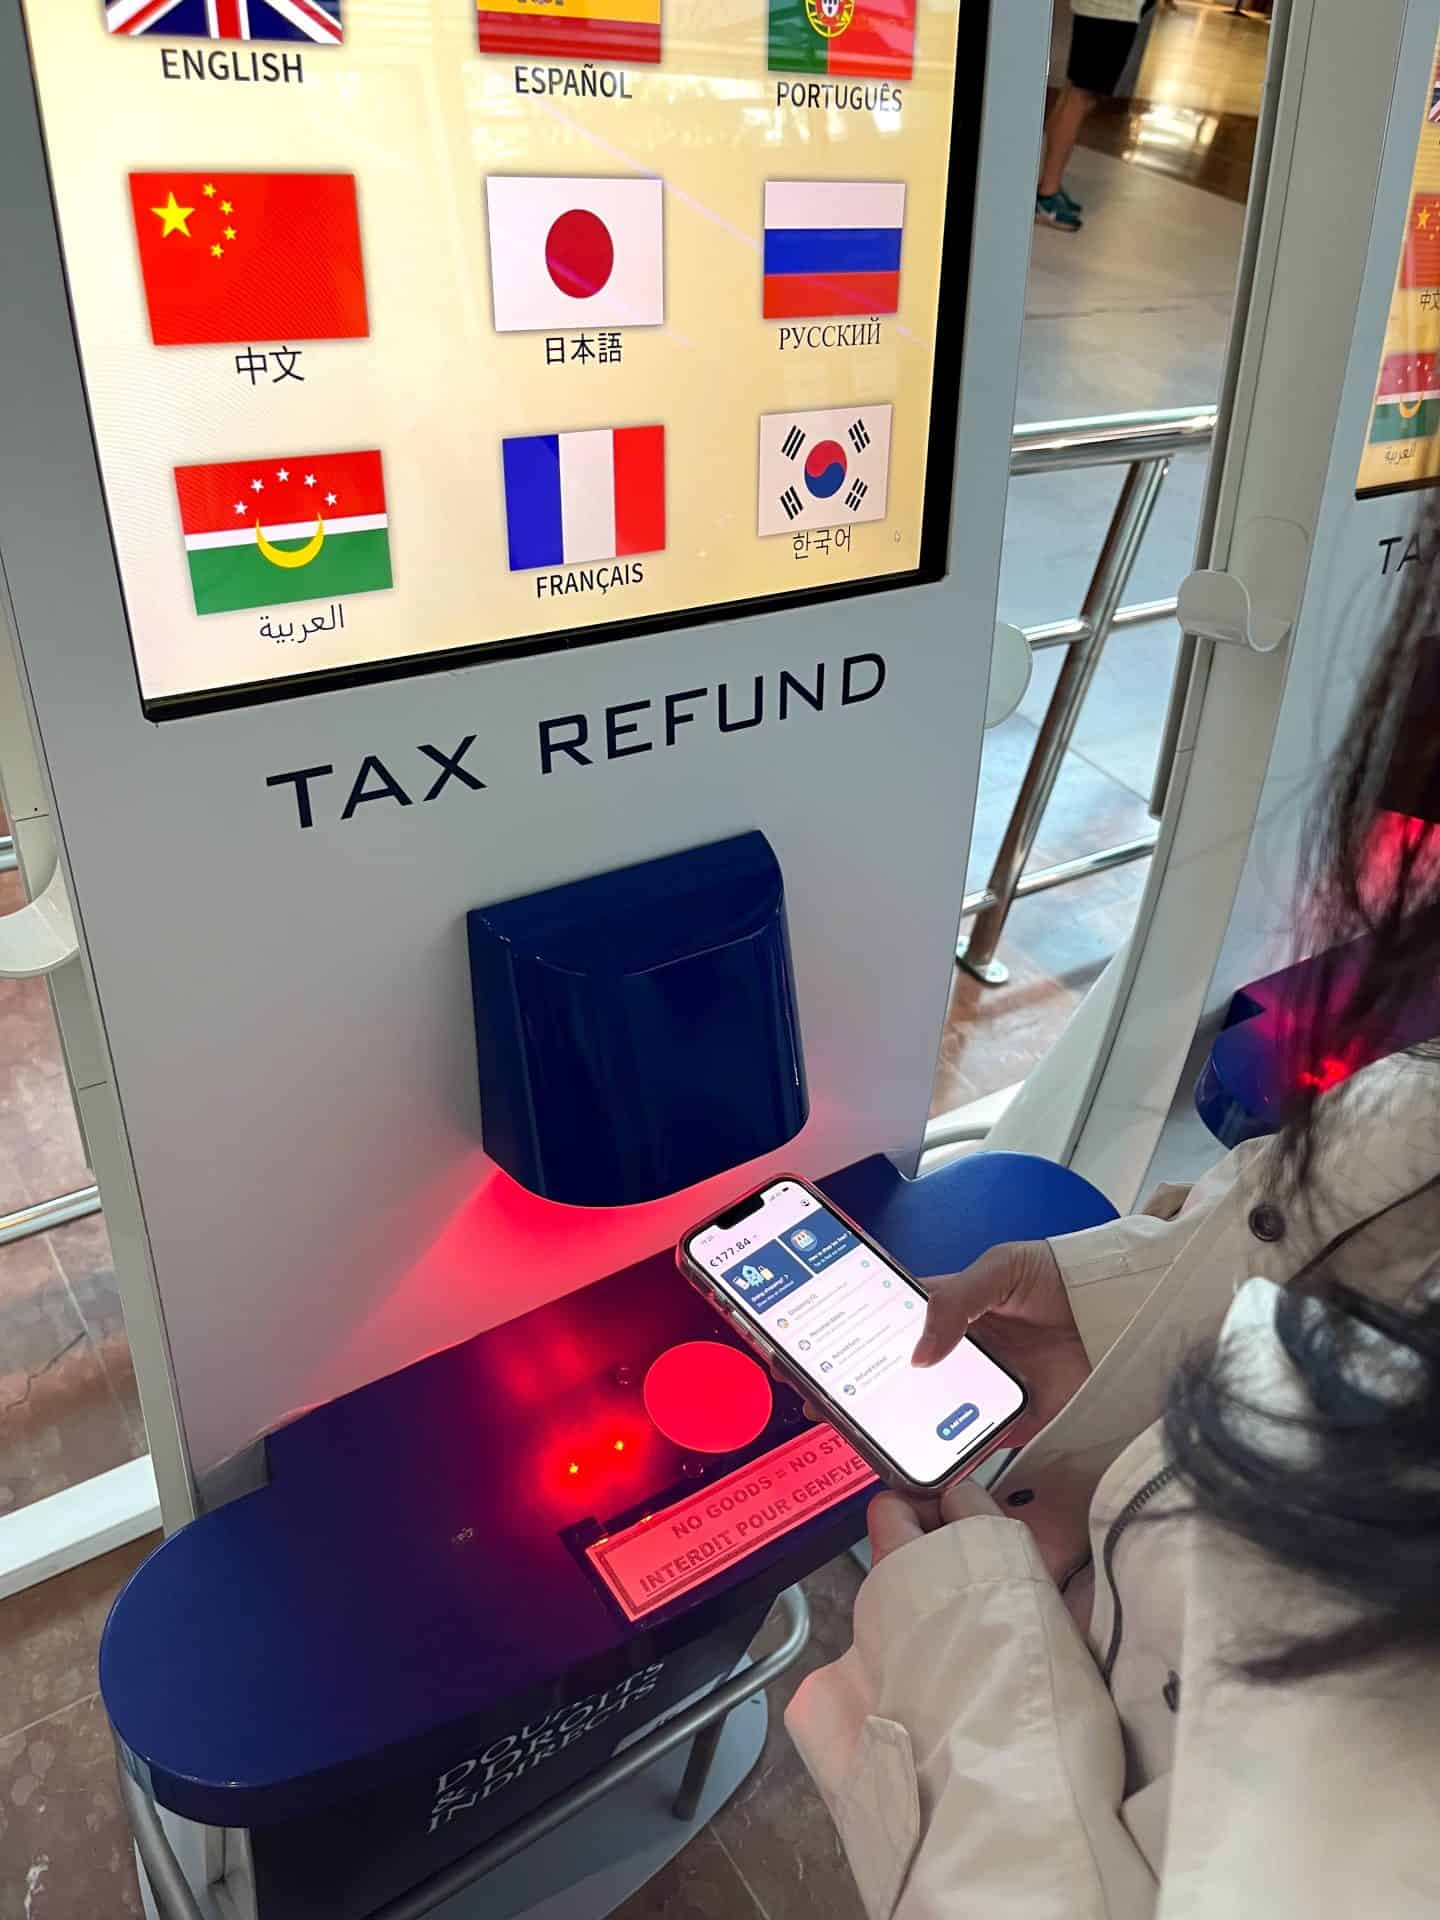 submit your vat tax refund at the train station or airport